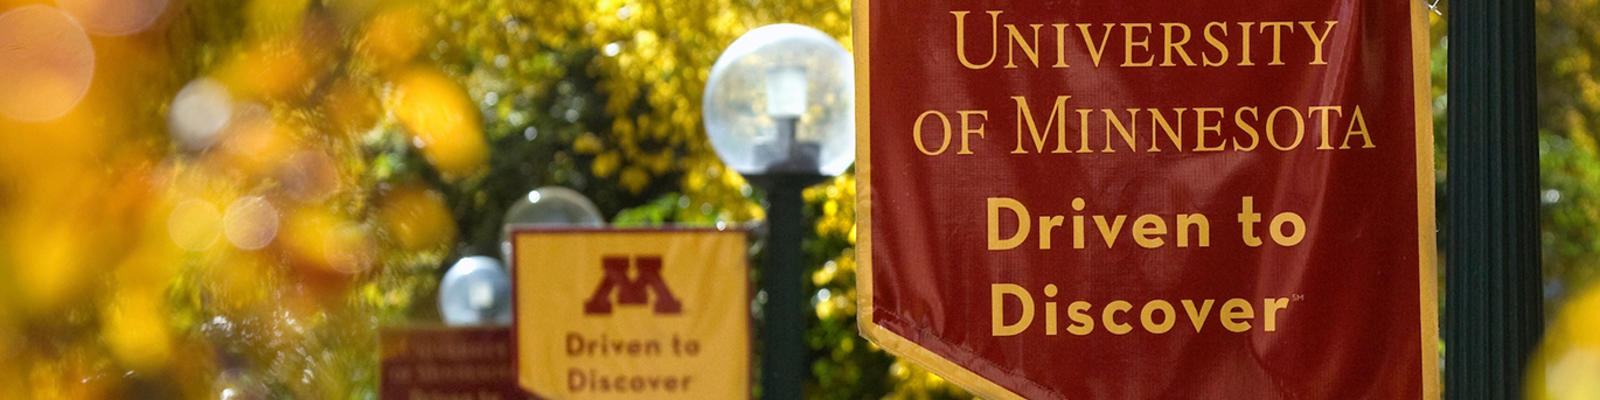 Banner that says University of Minnesota - Driven to Discover